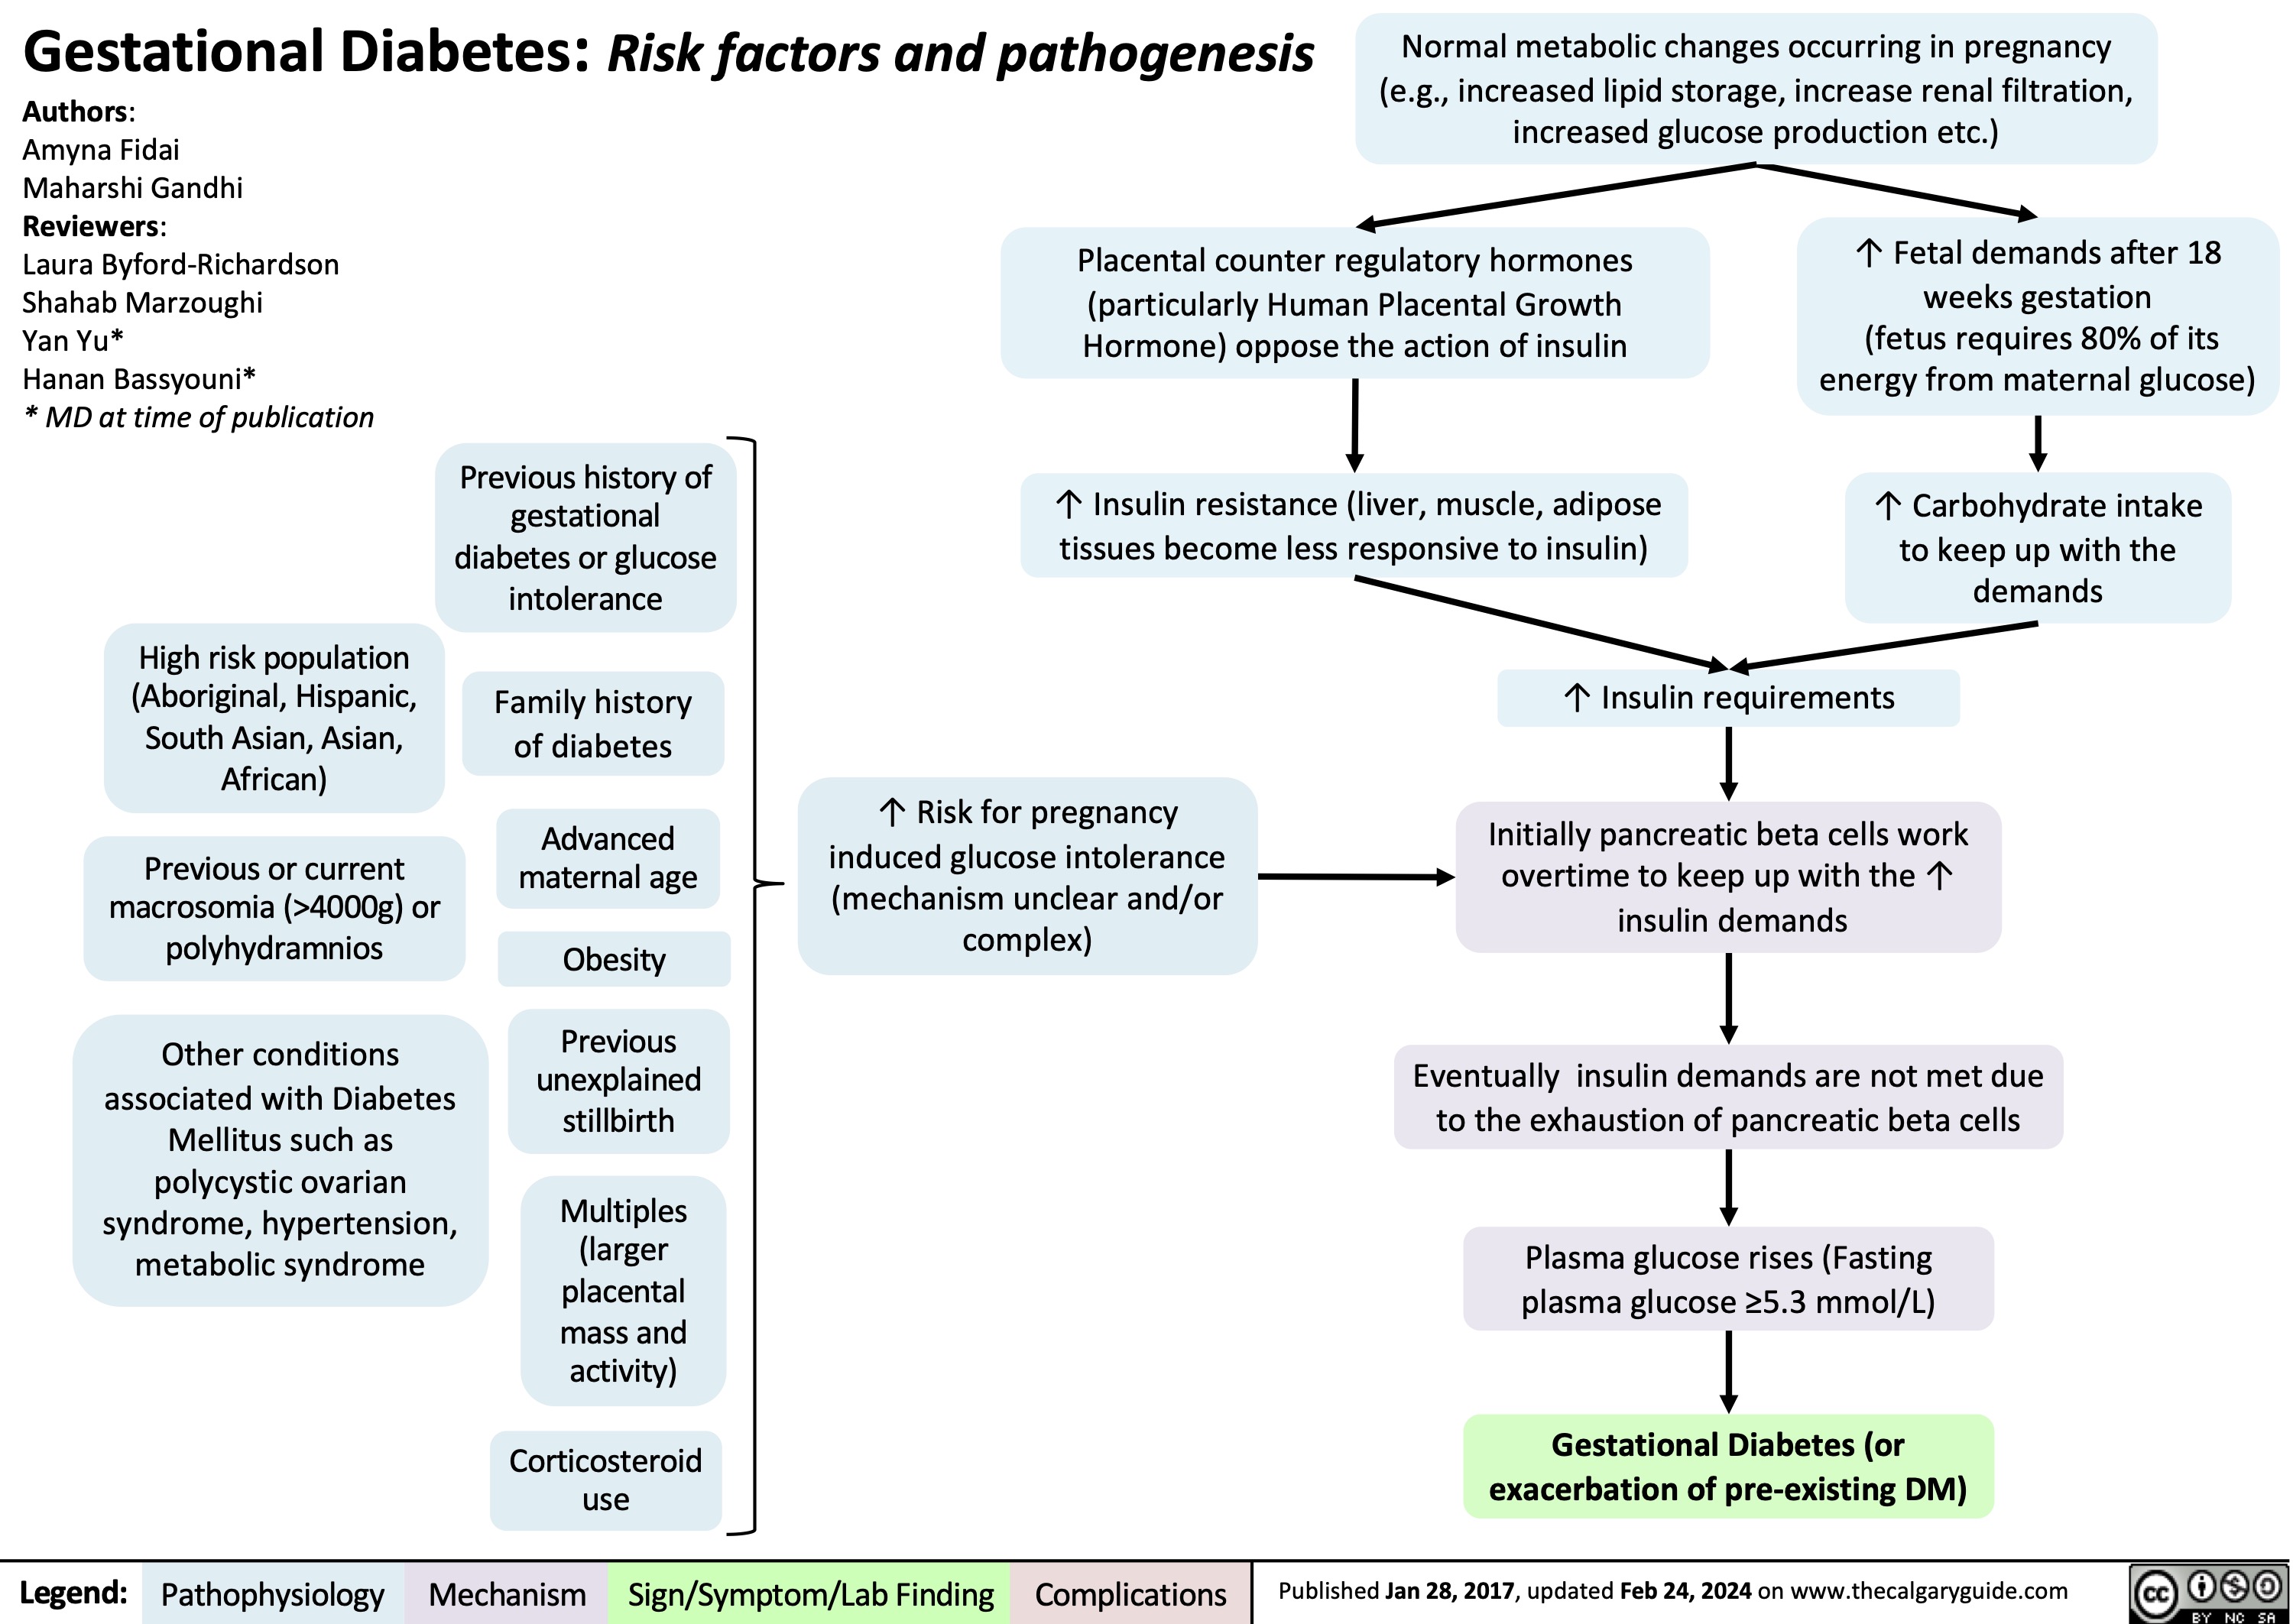 Gestational Diabetes: Risk factors and pathogenesis
Normal metabolic changes occurring in pregnancy (e.g., increased lipid storage, increase renal filtration, increased glucose production etc.)
 Authors:
Amyna Fidai
Maharshi Gandhi Reviewers:
Laura Byford-Richardson Shahab Marzoughi
Yan Yu*
Hanan Bassyouni*
* MD at time of publication
High risk population (Aboriginal, Hispanic, South Asian, Asian, African)
Previous or current macrosomia (>4000g) or polyhydramnios
Other conditions associated with Diabetes Mellitus such as polycystic ovarian syndrome, hypertension, metabolic syndrome
Placental counter regulatory hormones (particularly Human Placental Growth Hormone) oppose the action of insulin
↑ Insulin resistance (liver, muscle, adipose tissues become less responsive to insulin)
↑ Fetal demands after 18 weeks gestation
(fetus requires 80% of its energy from maternal glucose)
↑ Carbohydrate intake to keep up with the demands
       Previous history of gestational diabetes or glucose intolerance
Family history of diabetes
Advanced maternal age
Obesity
Previous unexplained stillbirth
Multiples (larger placental mass and activity)
Corticosteroid use
↑ Risk for pregnancy induced glucose intolerance (mechanism unclear and/or complex)
↑ Insulin requirements Initially pancreatic beta cells work
overtime to keep up with the ↑ insulin demands
Eventually insulin demands are not met due to the exhaustion of pancreatic beta cells
Plasma glucose rises (Fasting plasma glucose ≥5.3 mmol/L)
Gestational Diabetes (or exacerbation of pre-existing DM)
                      Legend:
 Pathophysiology
Mechanism
Sign/Symptom/Lab Finding
 Complications
 Published Jan 28, 2017, updated Feb 24, 2024 on www.thecalgaryguide.com
   